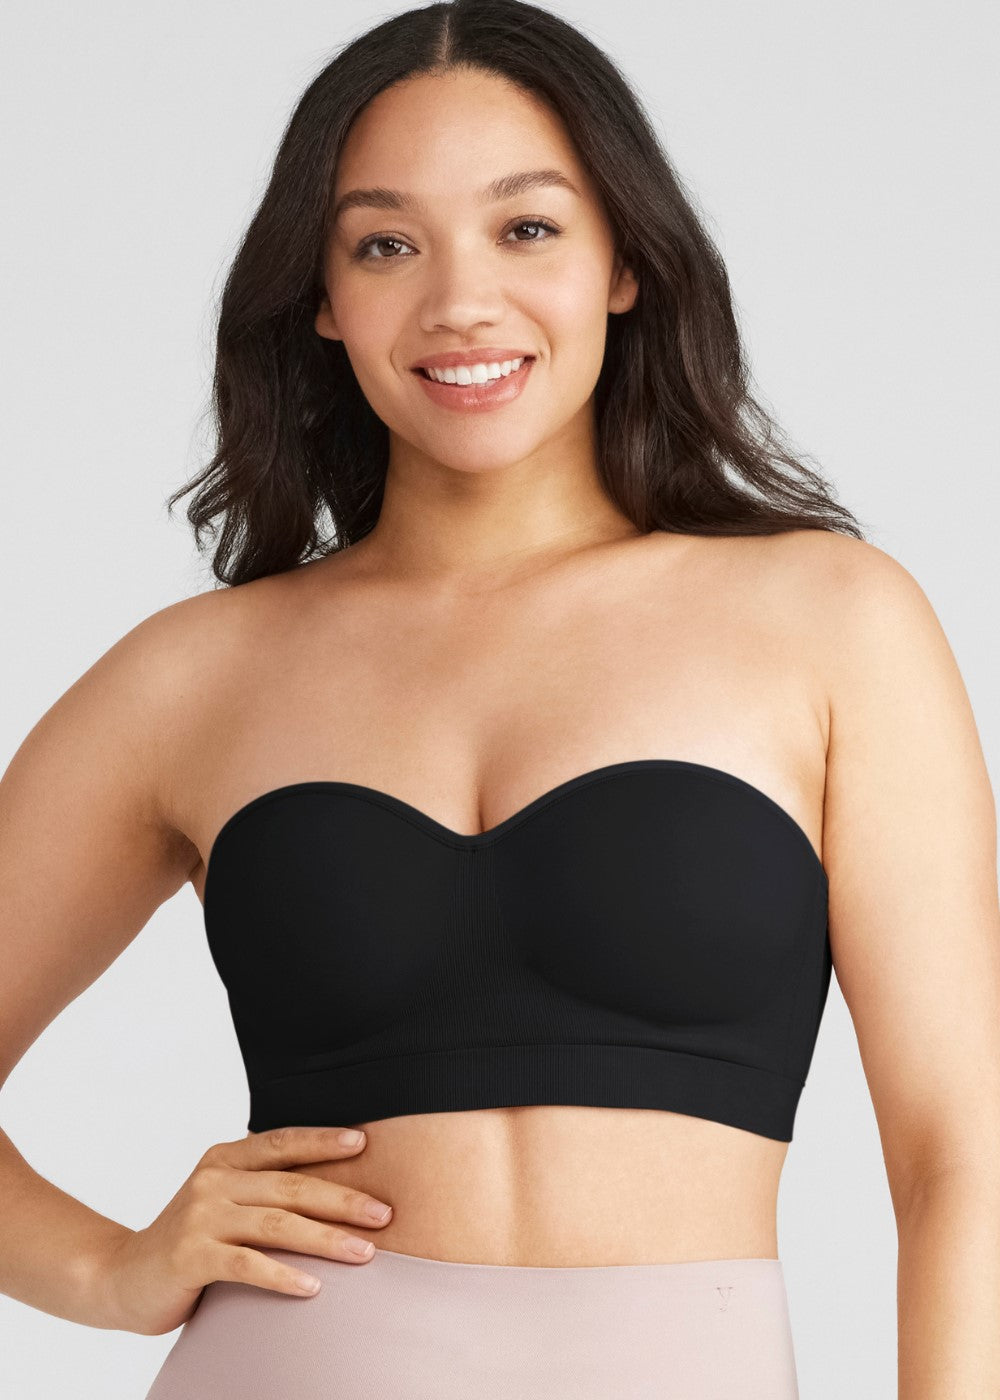 peyton contour strapless convertible bra in Black worn by a woman facing forward with one hand at waist Yummie